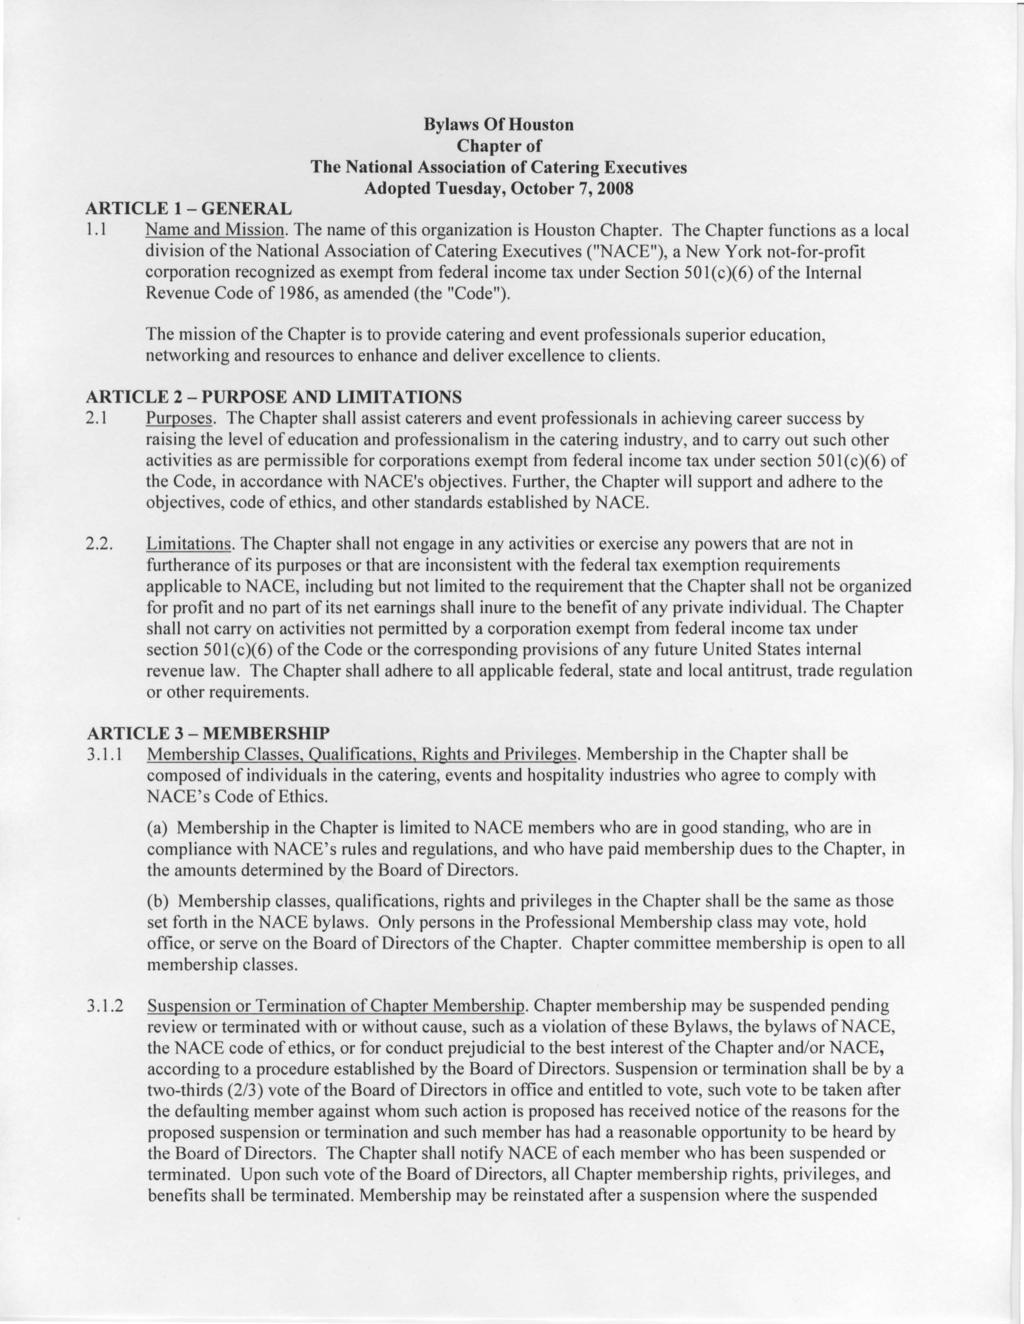 Bylaws Of Houston Chapter of The National Association of Catering Executives Adopted Tuesday, October 7,2008 ARTICLE 1 - GENERAL l.l Name and Mission. The name of this organization is Houston Chapter.